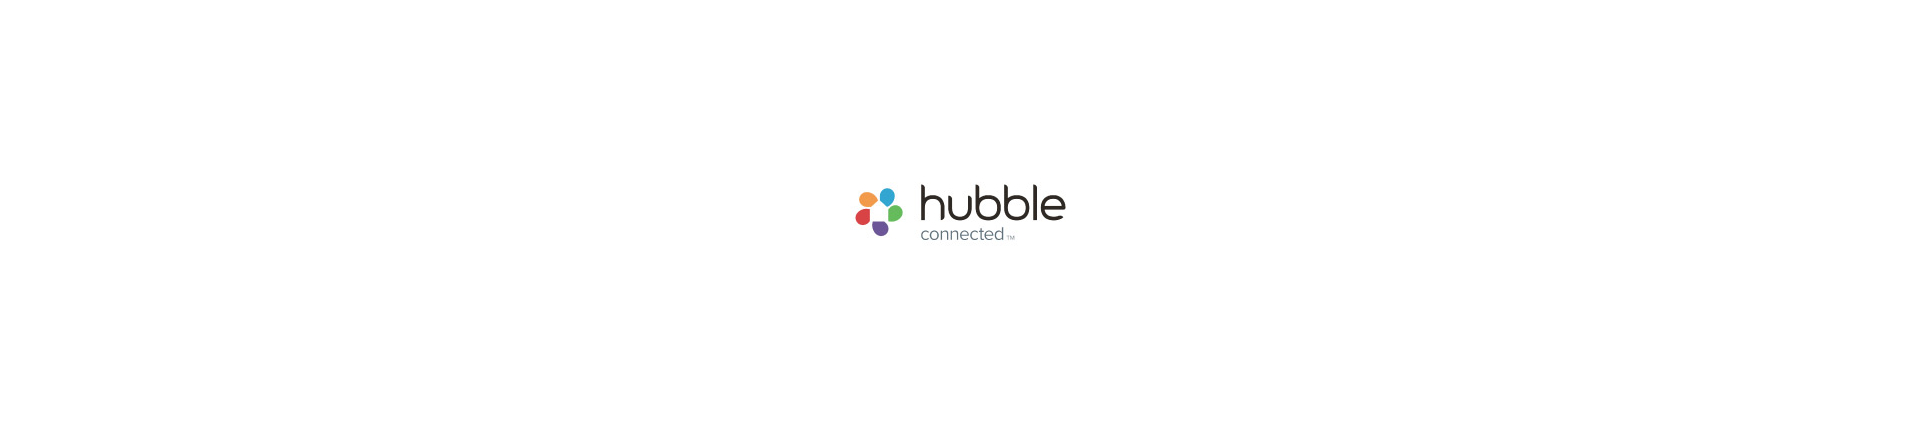 hubble connected™